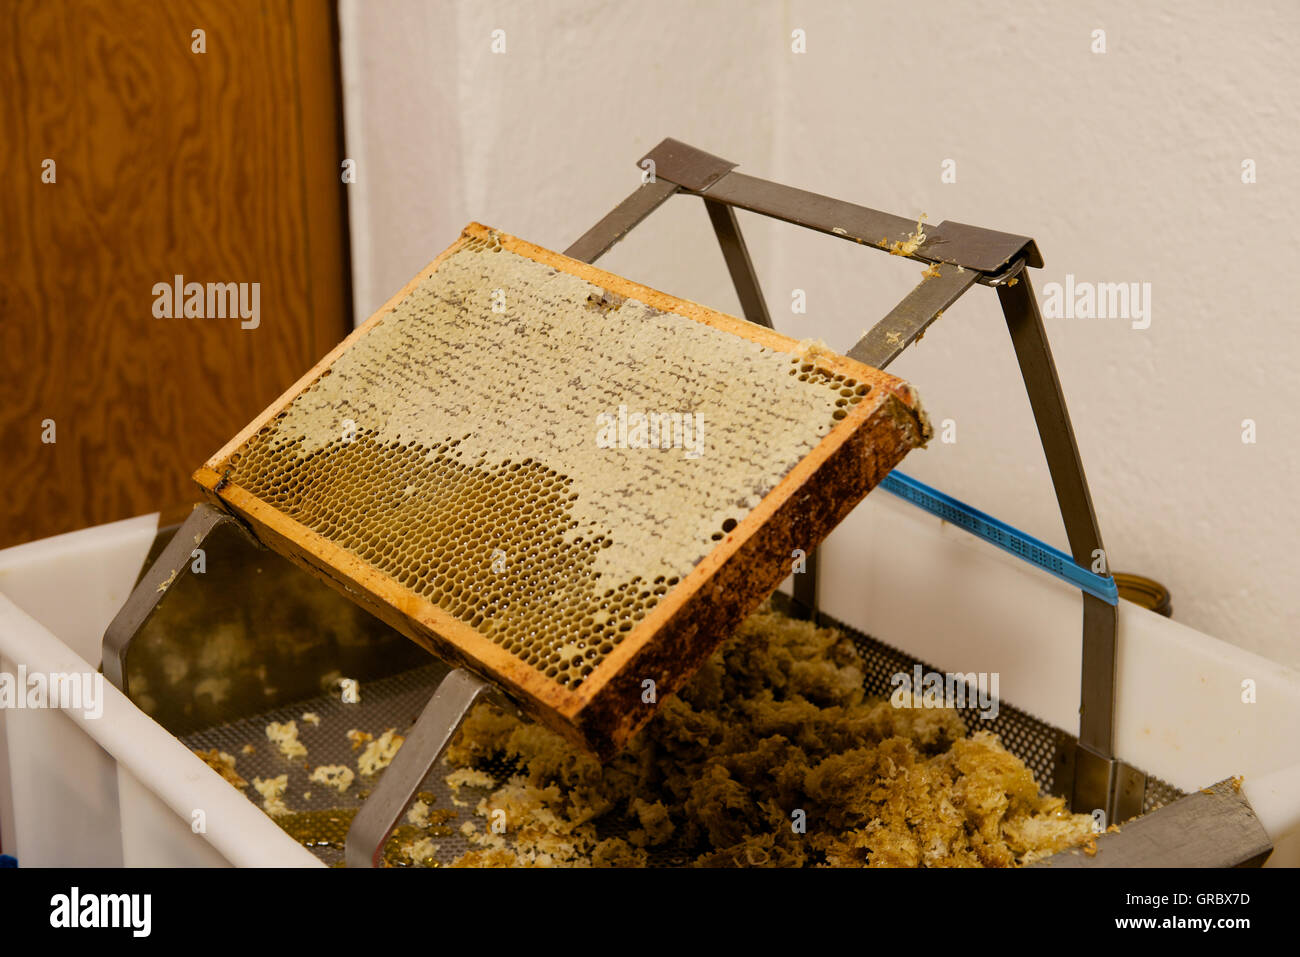 Honeycomb With Stuffed And Partly Capped Cells On Uncapping Tray Stock Photo